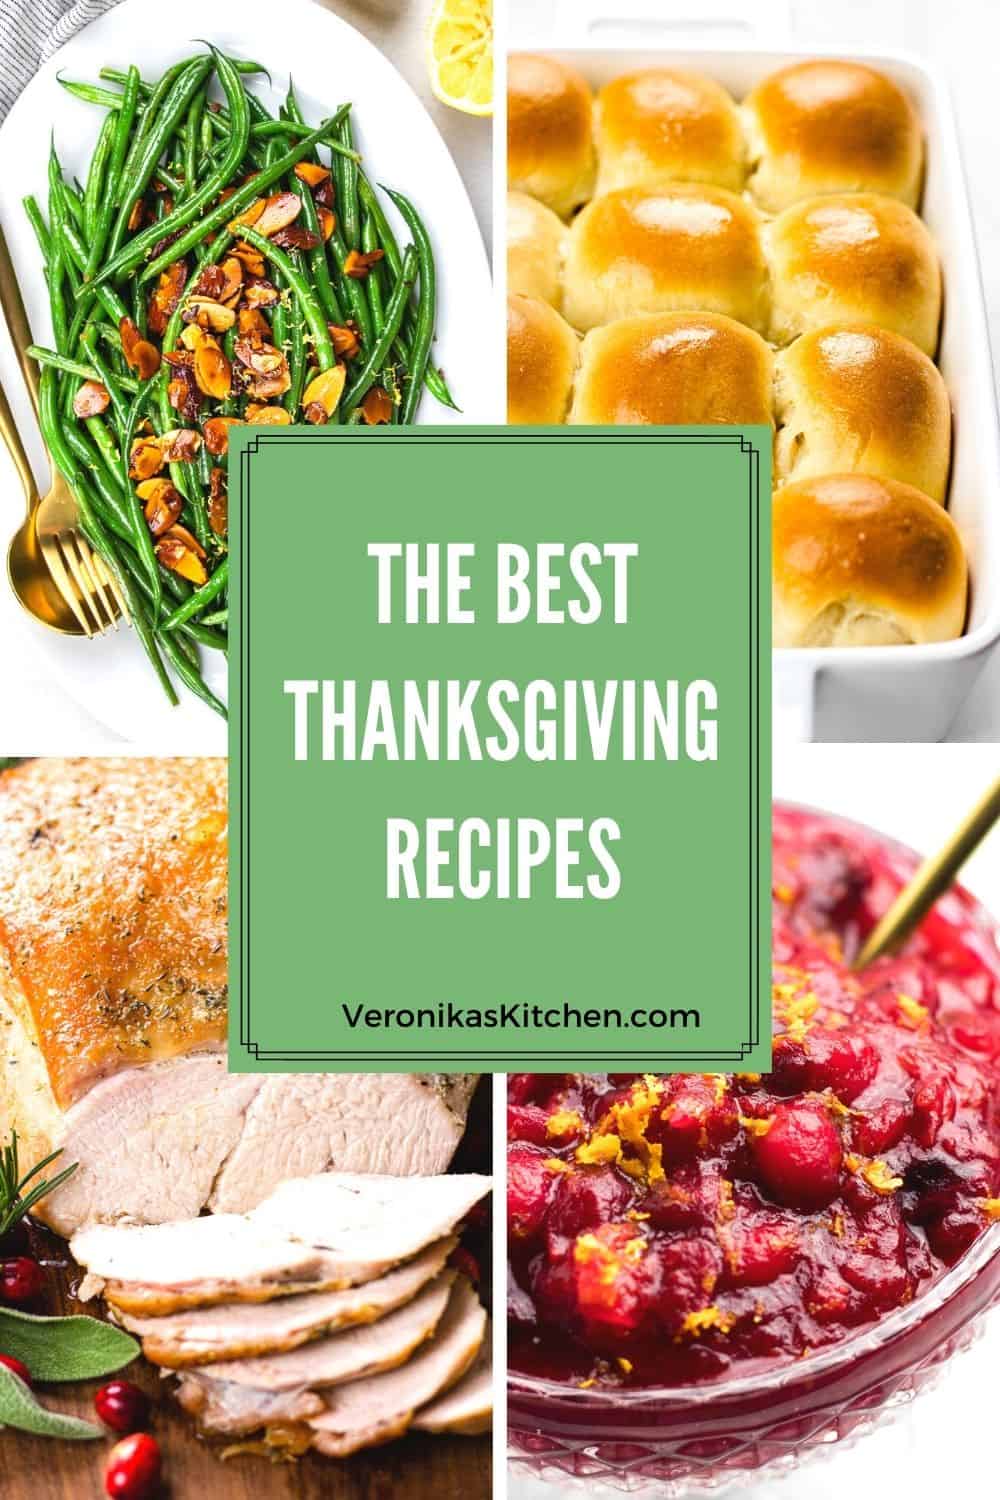 A collection of Thanksgiving recipes.